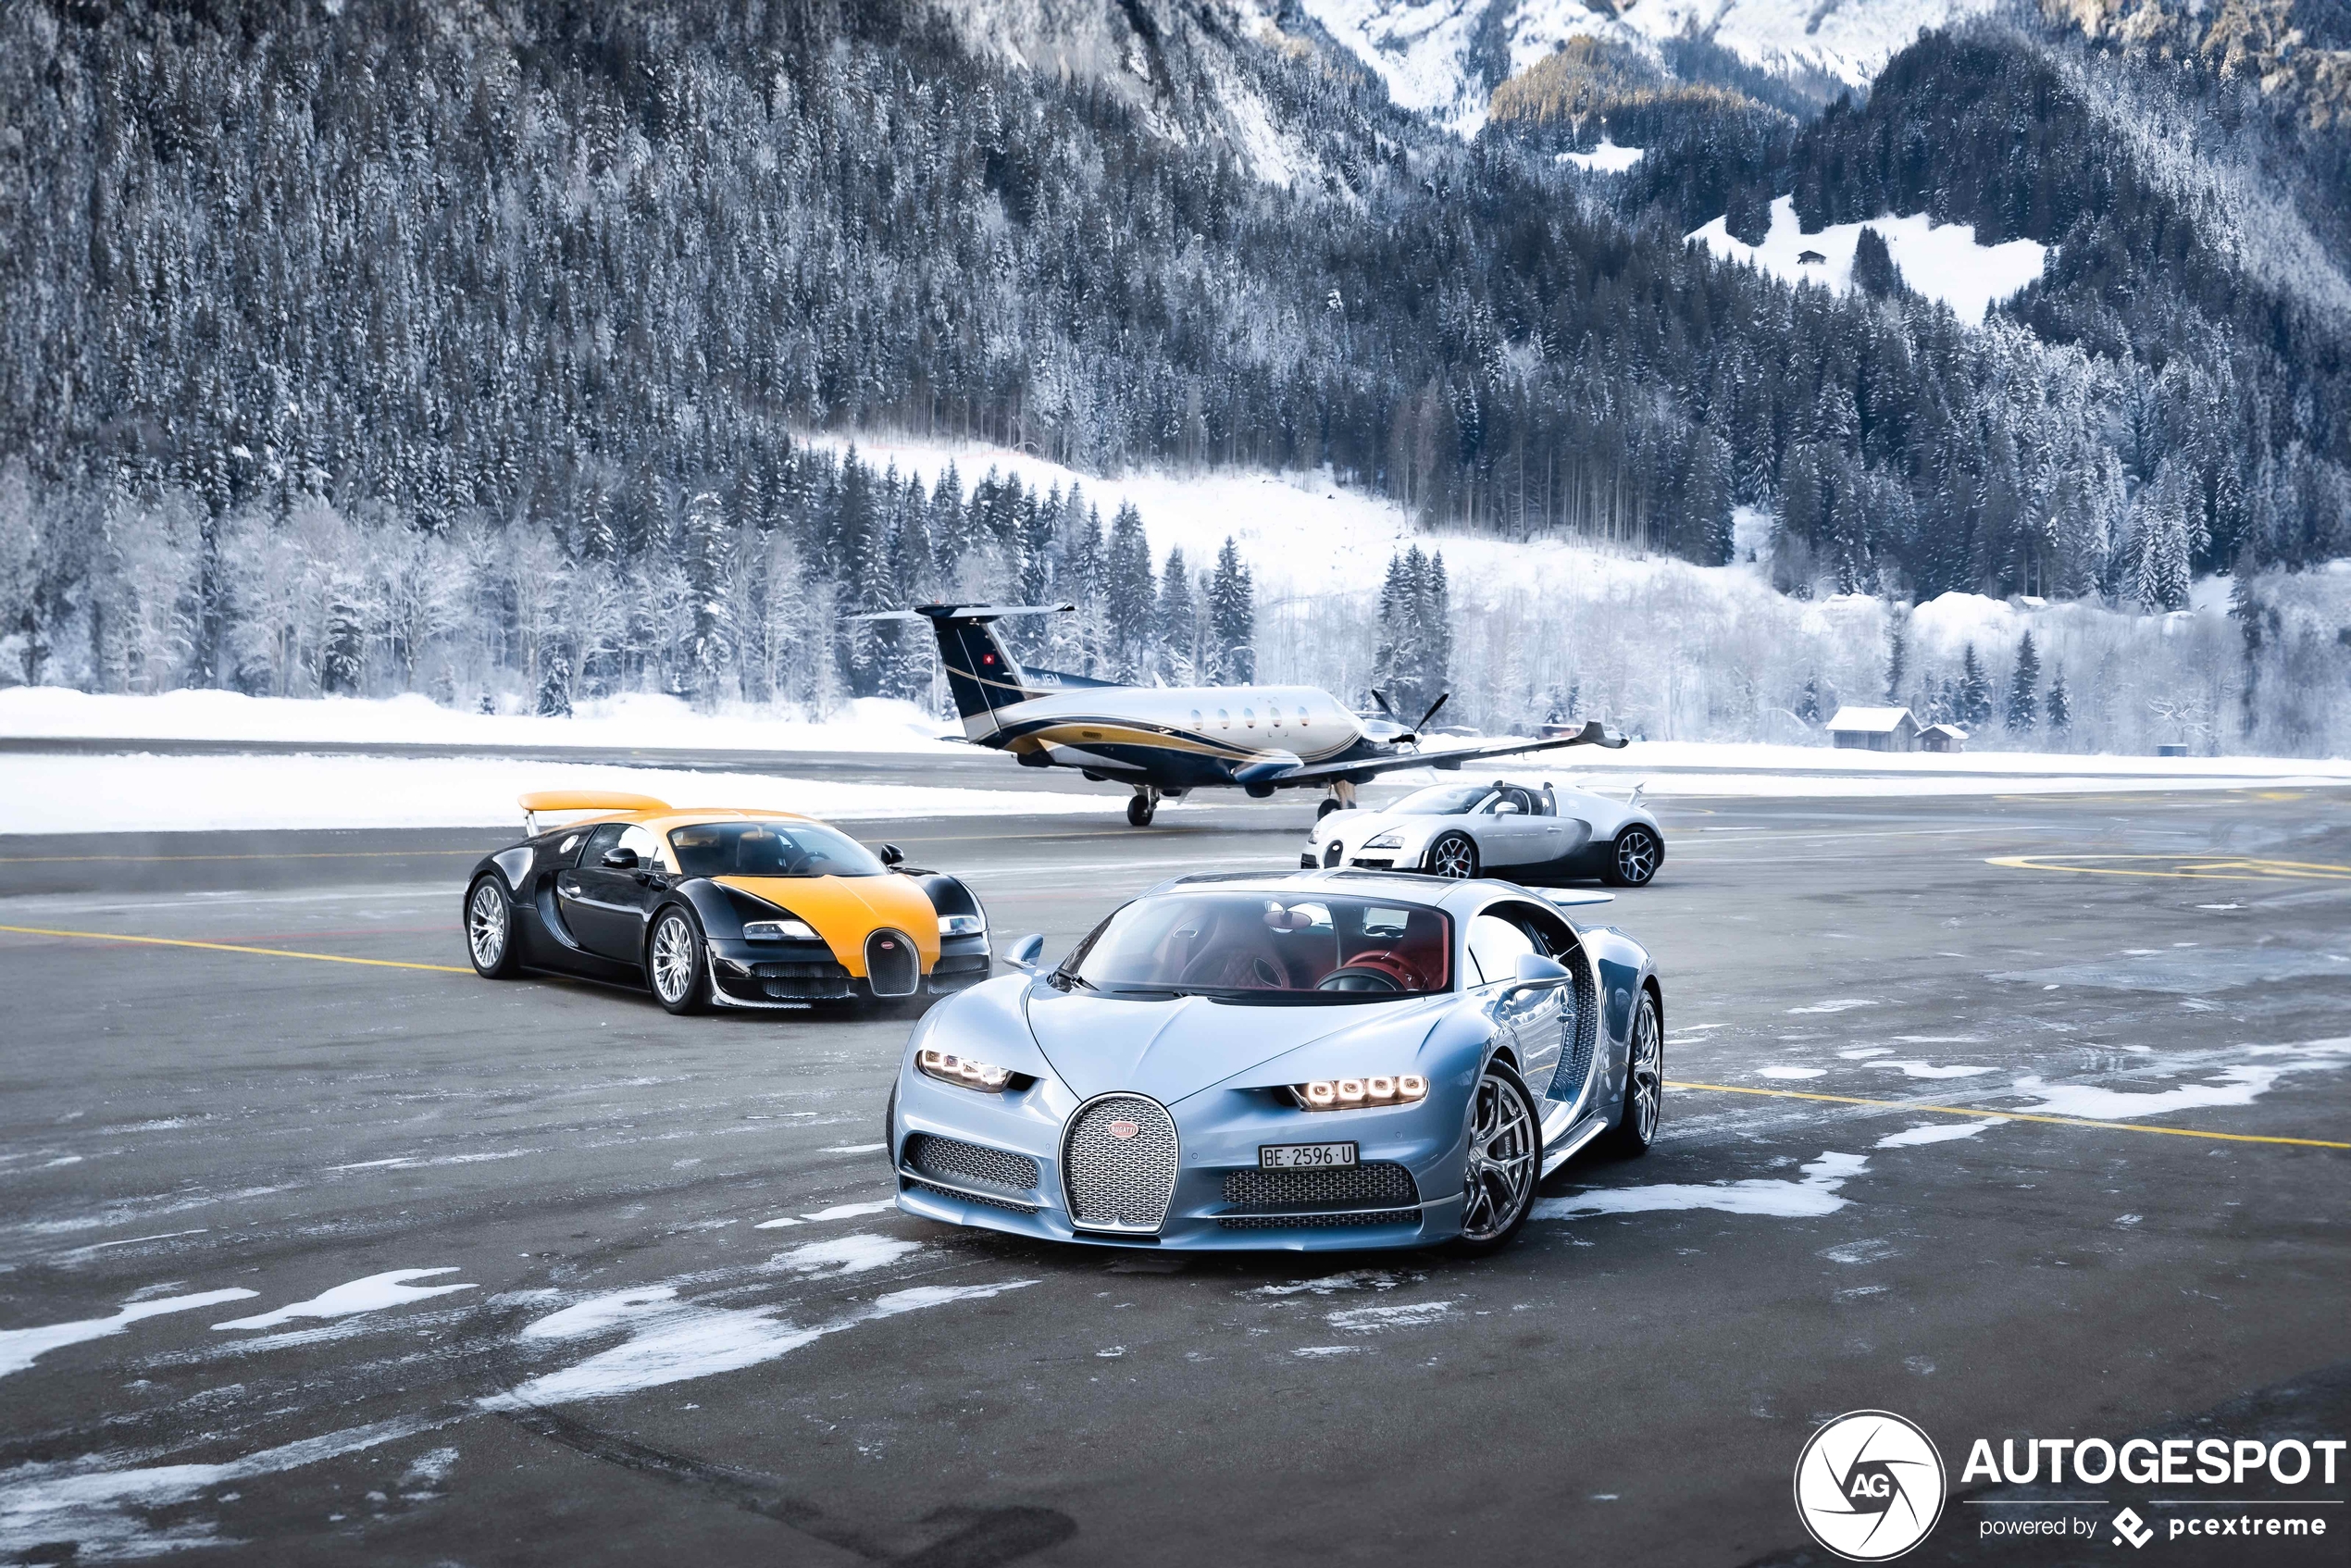 Incredible Bugatti combination from Gstaad